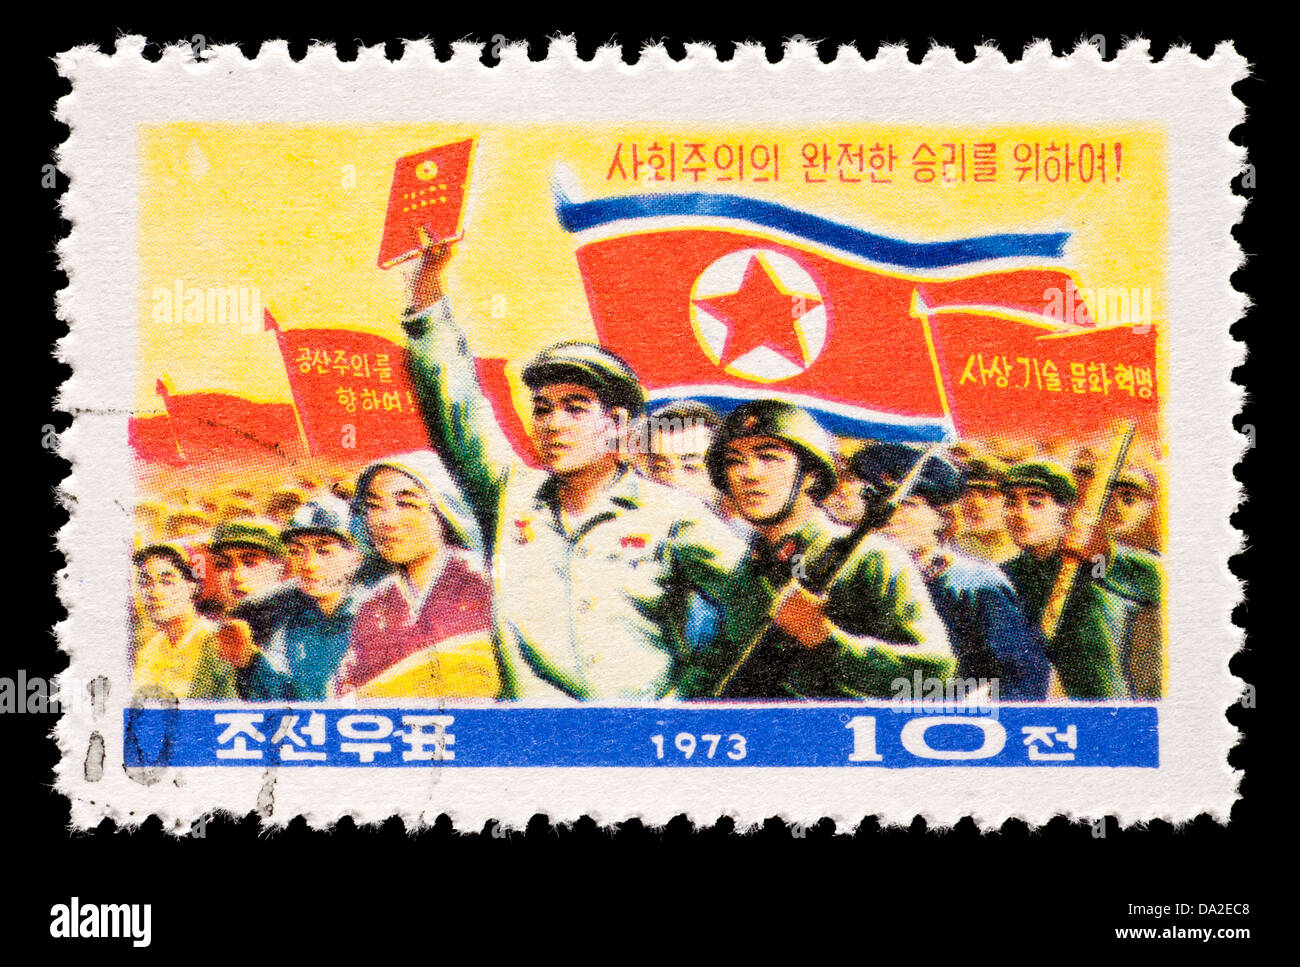 Postage stamp from North Korea (DPRK) depicting the struggle for Korean reunification. Stock Photo